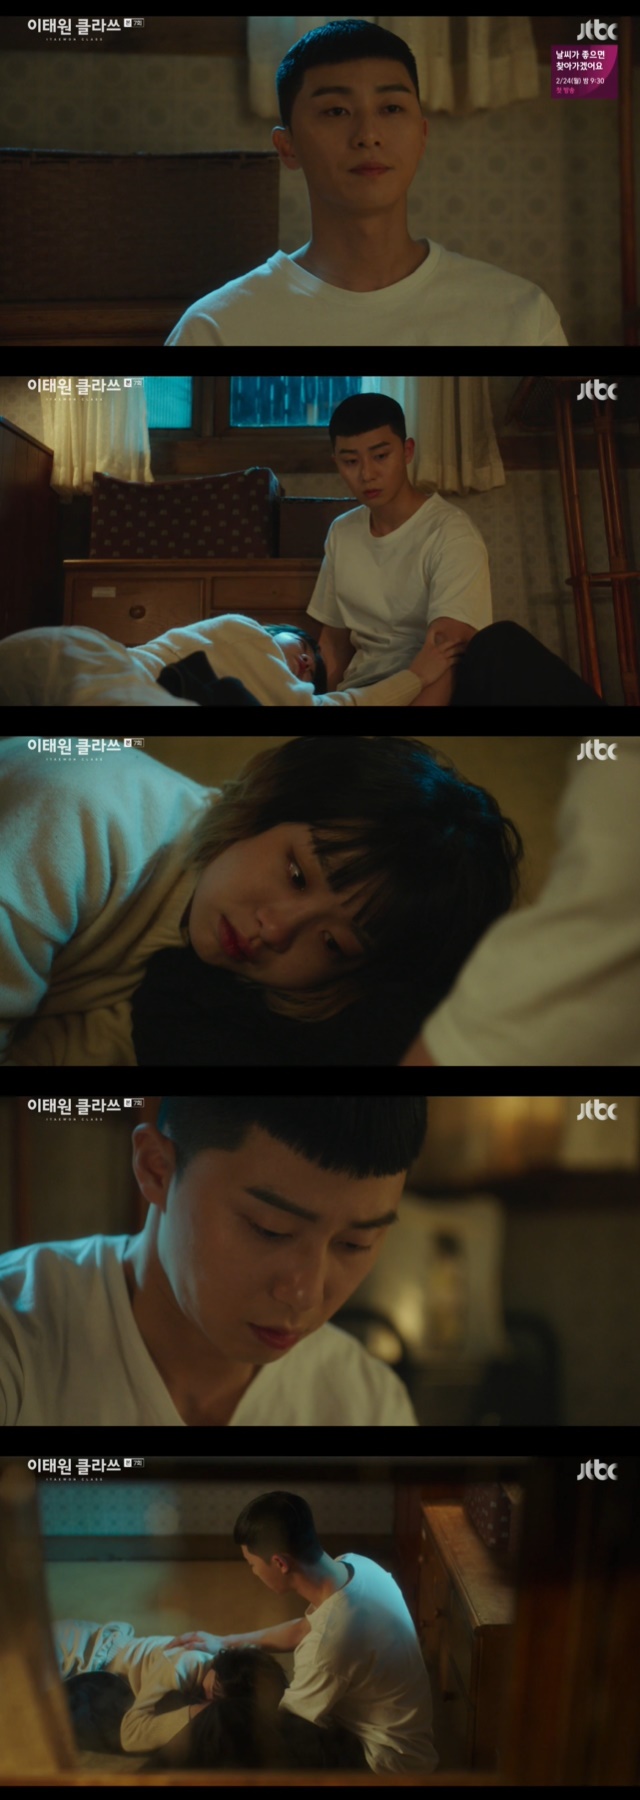 Kim Da-mi wept when she saw a negative-pressure wound therapy on Park Seo-joon body.In the seventh episode of JTBCs Golden Earth Drama Itaewon Klath (playplayed by Cho Kwang-jin/directed by Kim Sung-yoon) broadcast on February 21, Park Sae-ro-yi (Park Seo-joon) visited the house of Oh Byung-hun (played by Yoon Kyung-ho), a police officer who concealed his fathers accident in the past with Joe-yool Lee (Kim Da-mi).Oh Byung-hun, who felt guilty for Park Sae-ro-yi, kneeled down and asked him not to come anymore.But Park Sae-ro-yi said, What you can do for me is reveal the truth and turn yourself in.At least I should be a dignified father who can support my daughters dream. Joe-yool Lee, who lay in the room waiting for Park Sae-ro-yi, rested his head on Park Sae-ro-yis lap.Then Joe-yool Lees eyes were filled with several negative-pressure wound therapies throughout the Park Sae-ro-yi body.When Joe-yol Lee found out that he was a negative-pressure wound therapy, a negative-pressure wound that was injured while working, shed tears with sadness that she would have been hard alone.Lee Ha-na